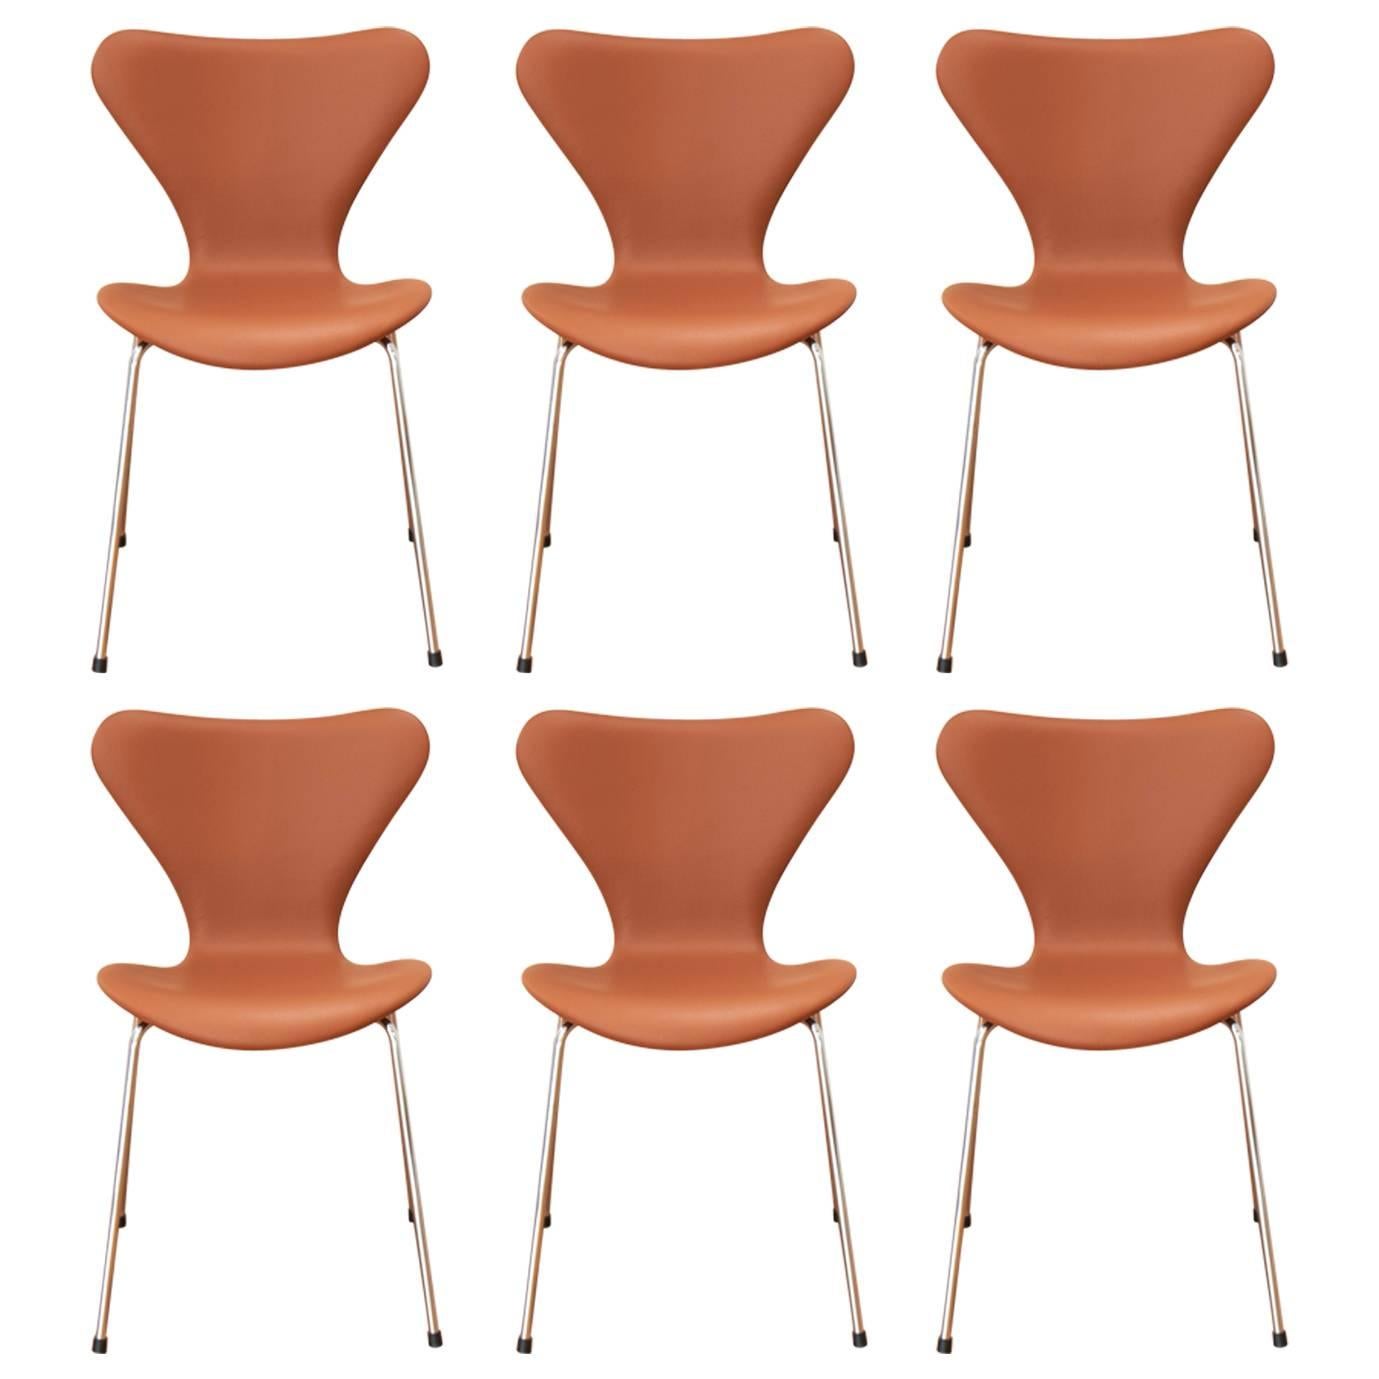 Six Pieces, Arne Jacobsen 3107 Chairs For Sale